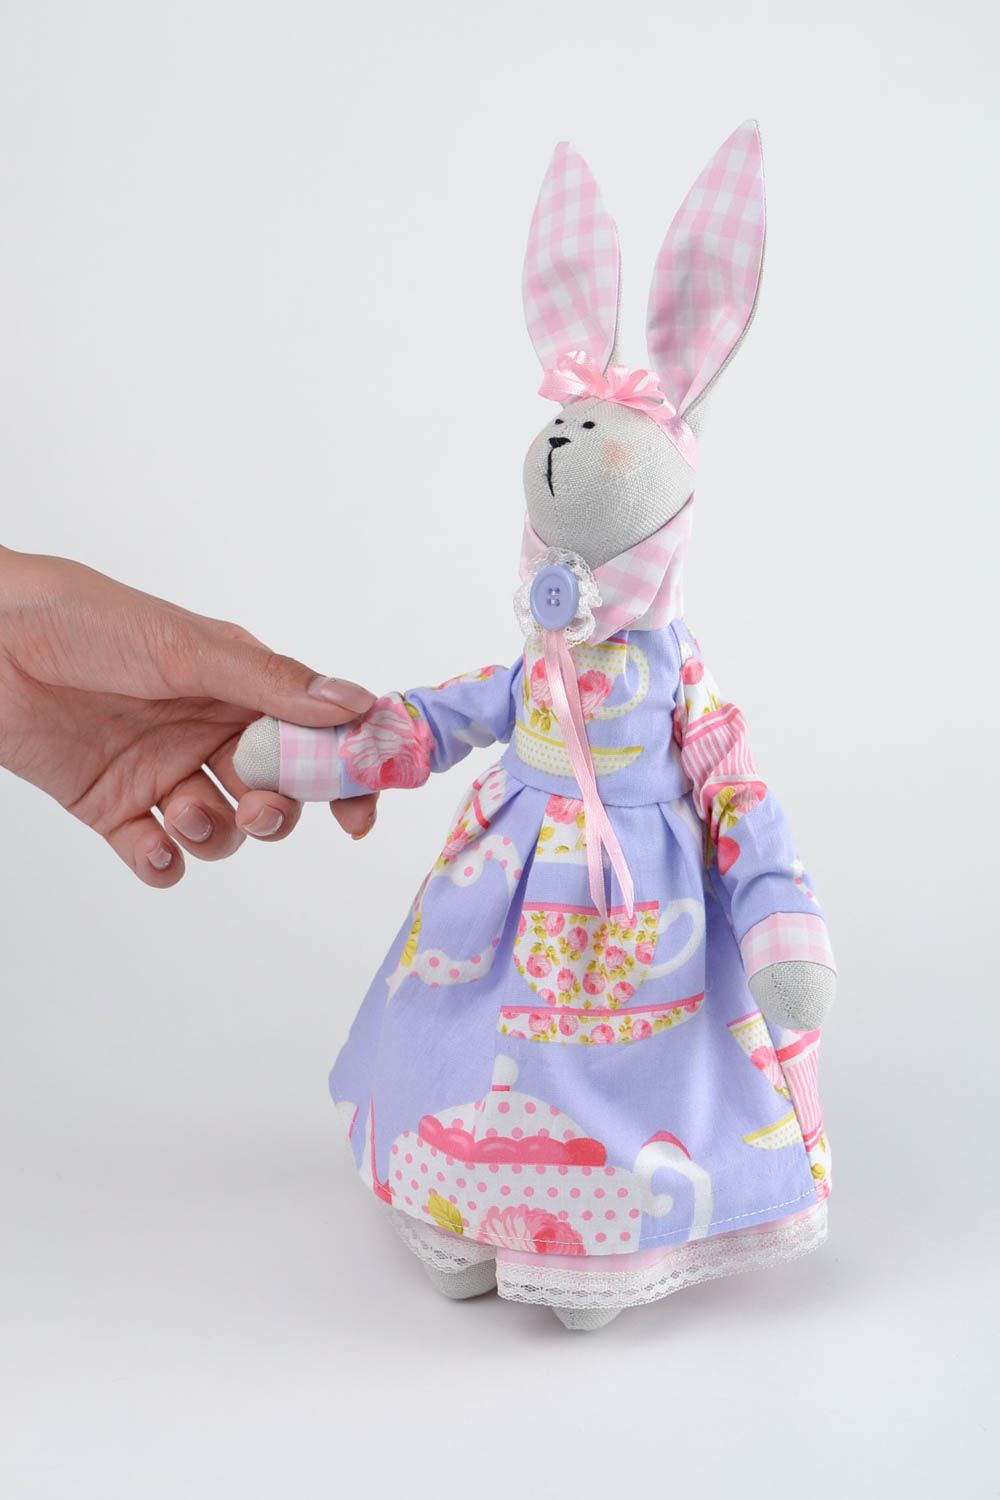 Handmade toy soft toy rabbit toy stuffed animals home decor toys for kids photo 2